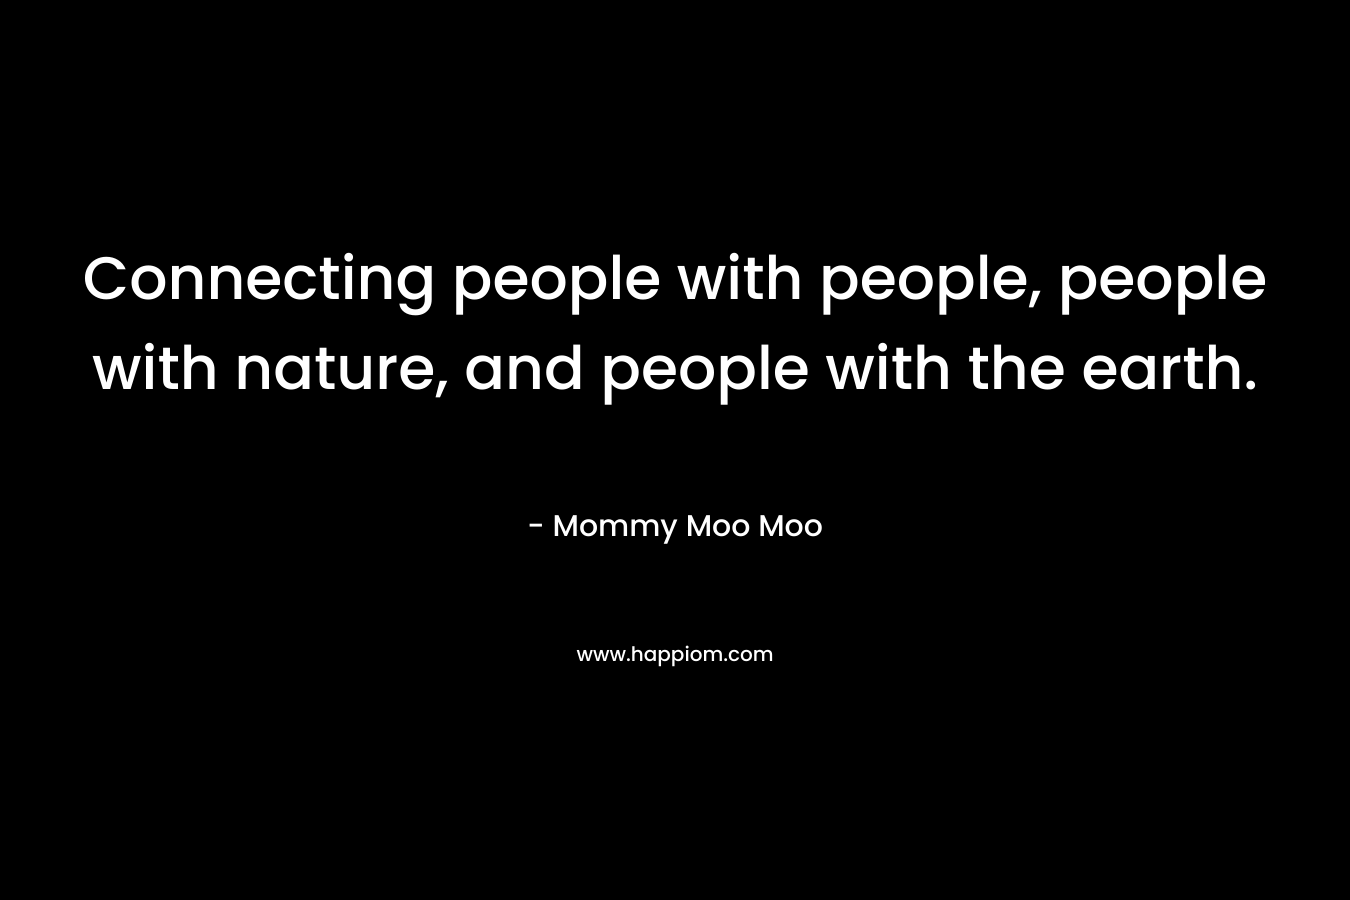 Connecting people with people, people with nature, and people with the earth. – Mommy Moo Moo